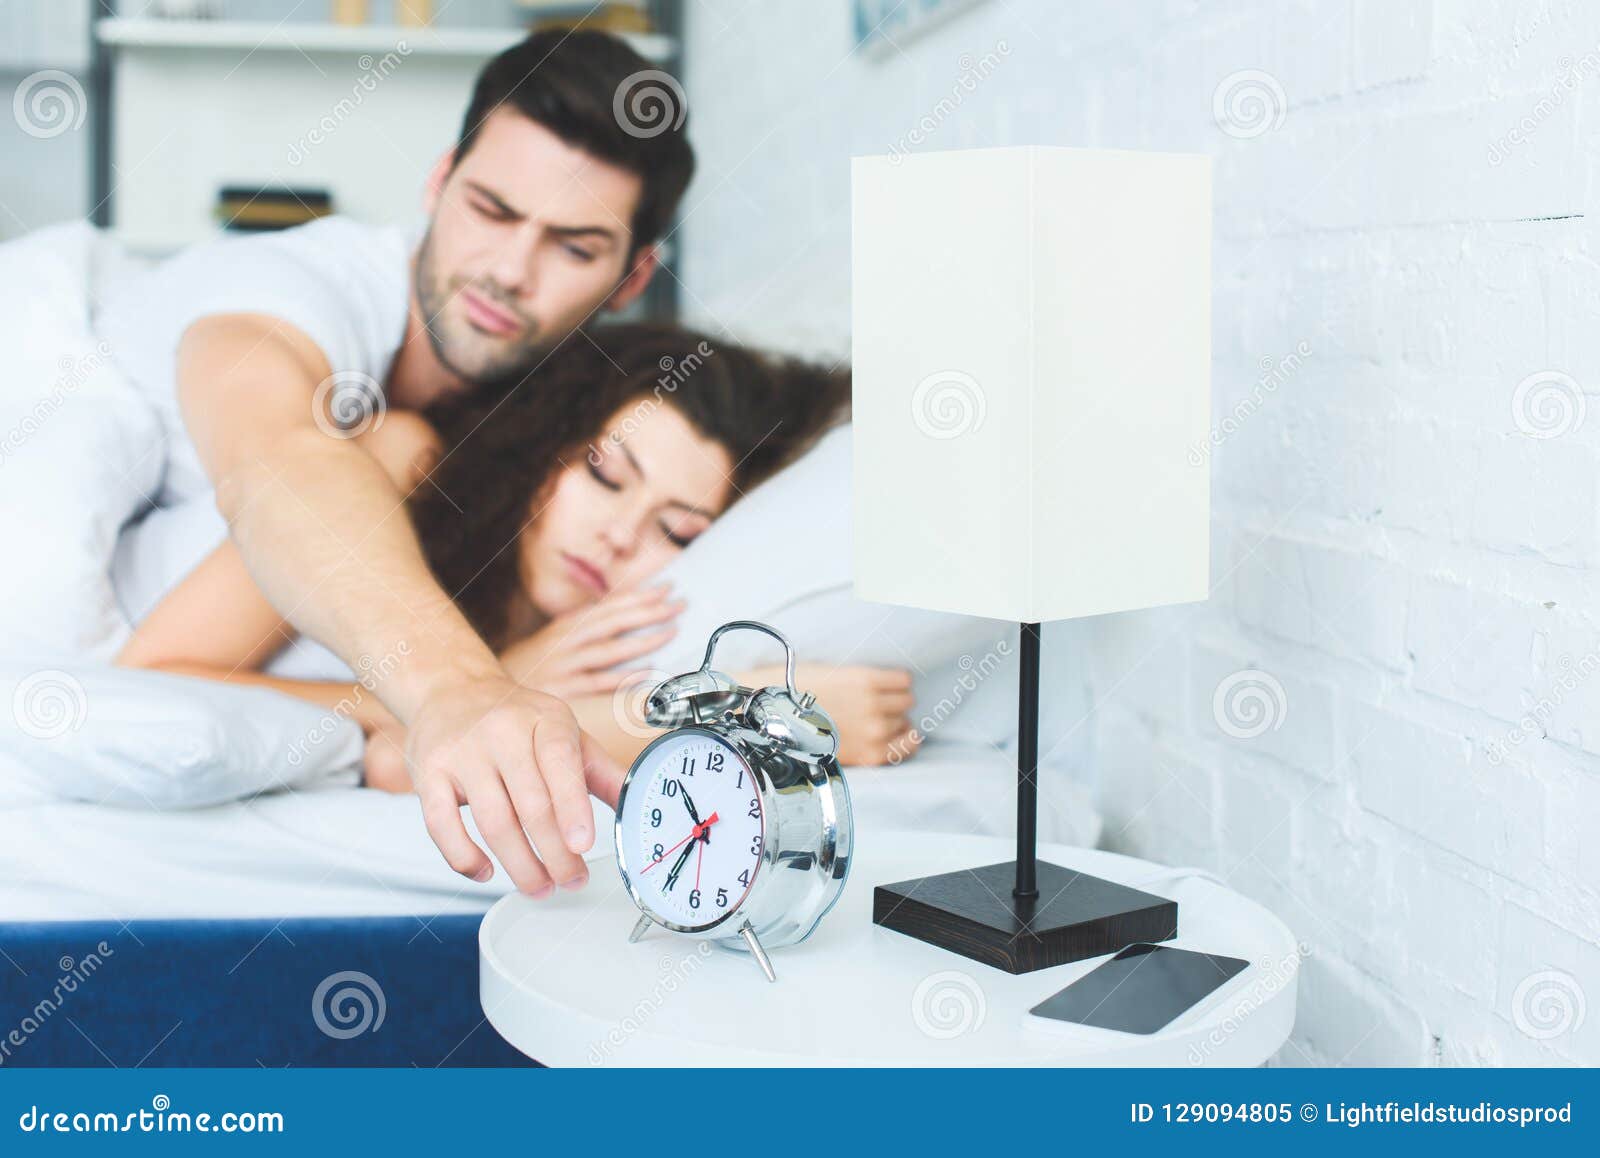 Young Man Reaching For Alarm Clock While Sleeping With Girlfriend Stock